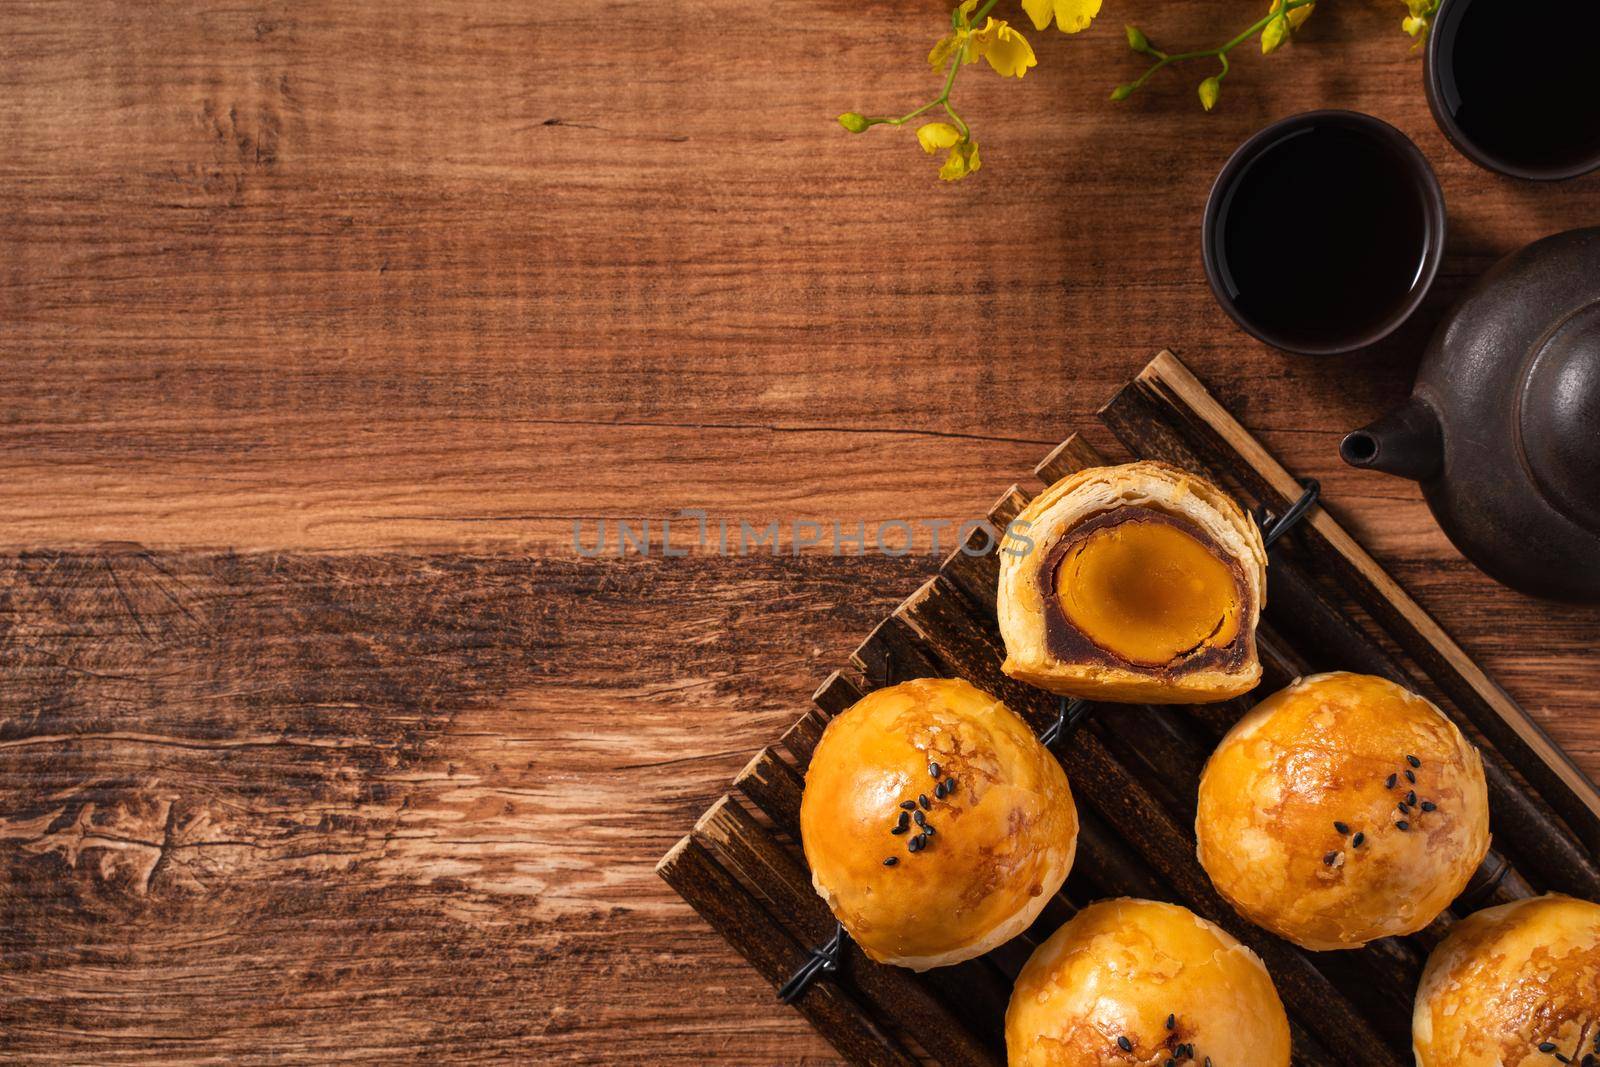 Close up of Moon cake yolk pastry, mooncake for Mid-Autumn Festival holiday on wooden table background